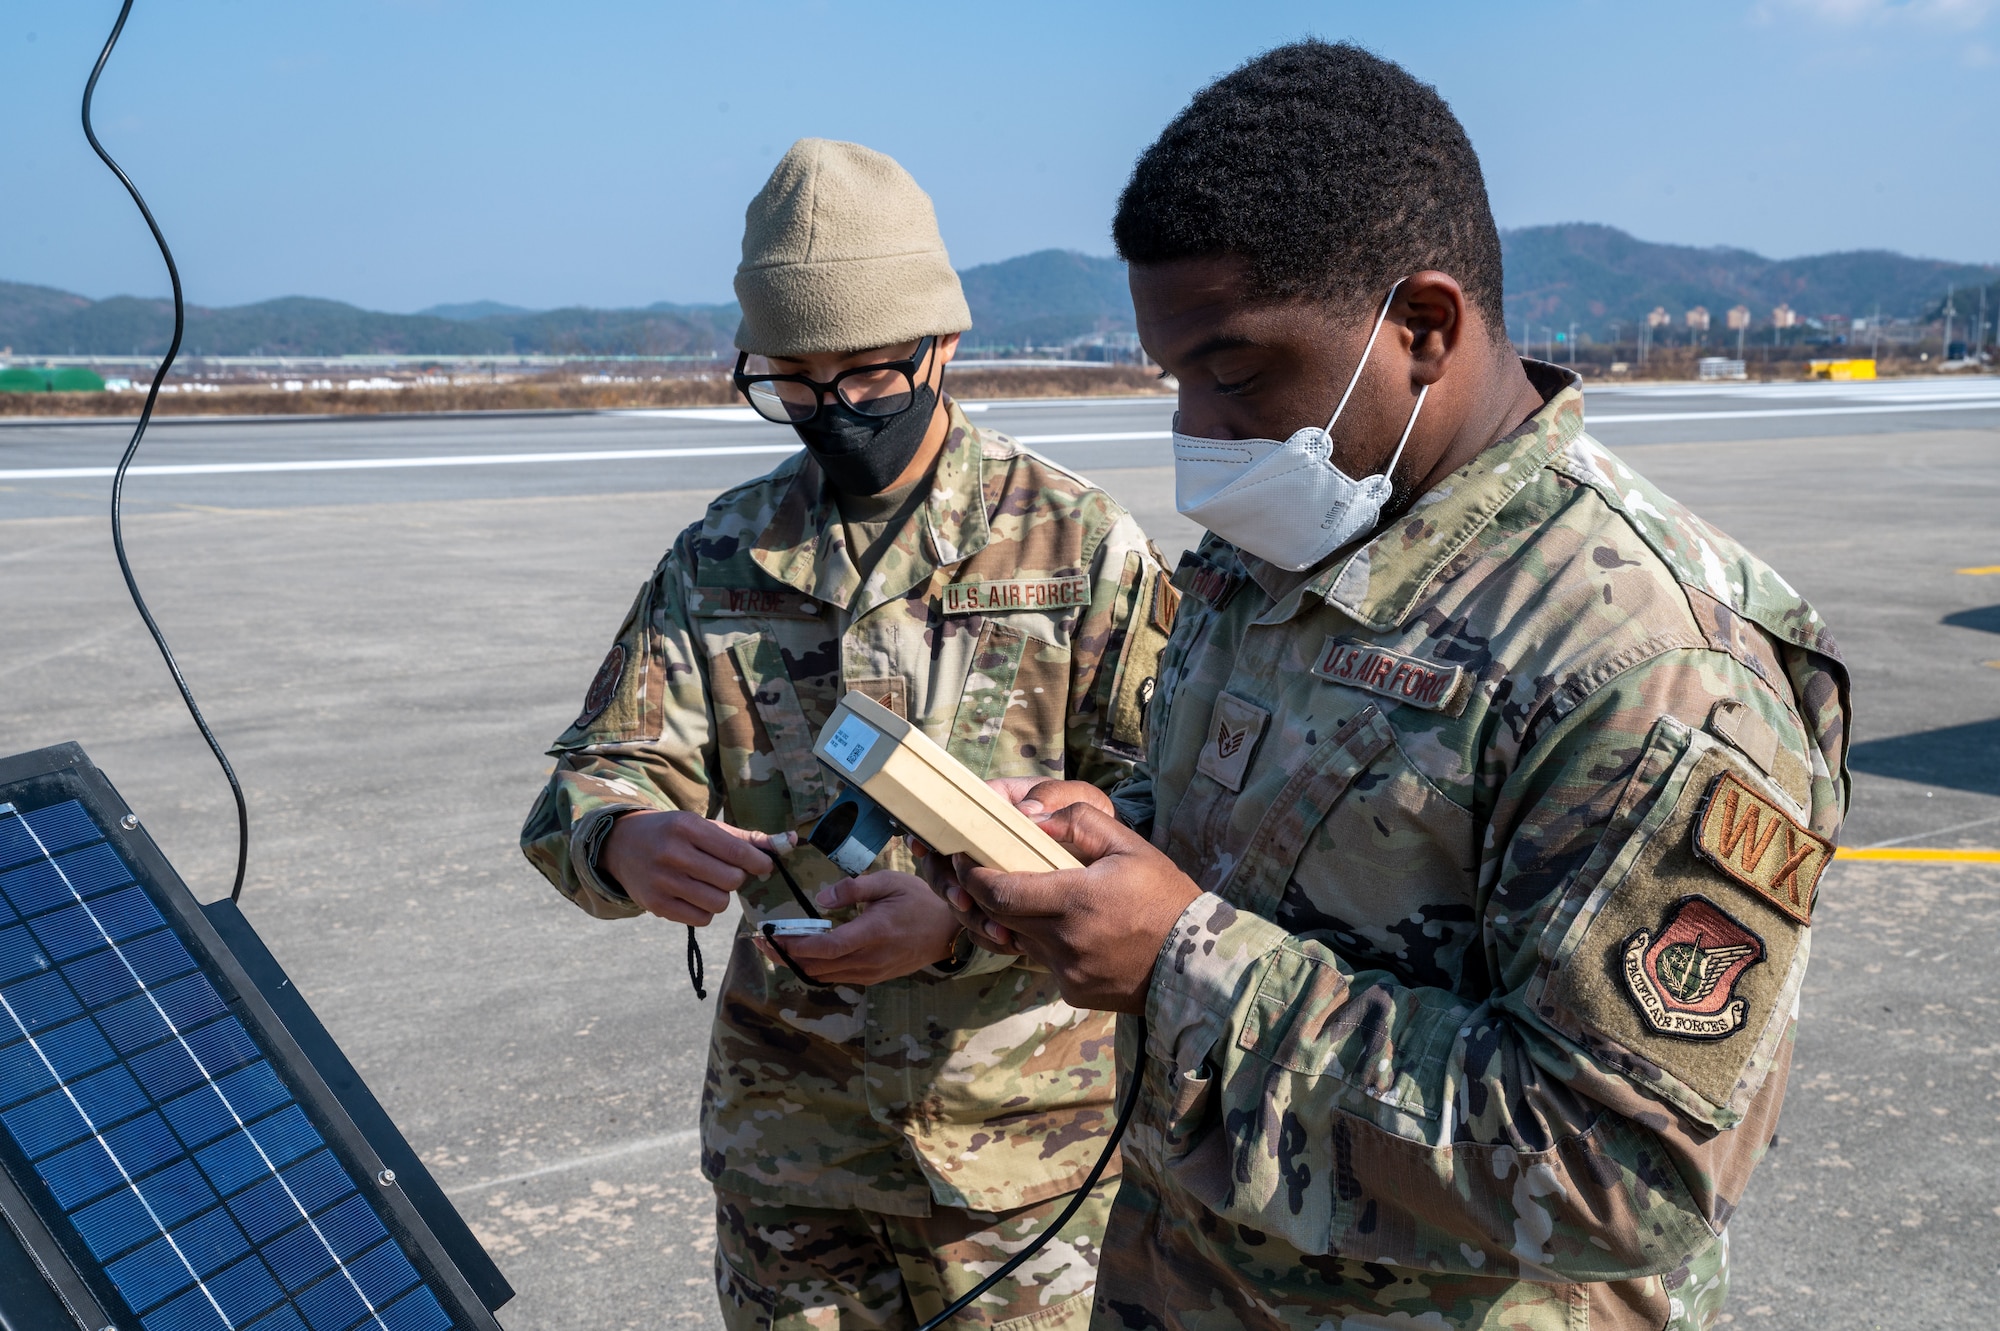 U.S. Air Force Staff Sgts. Andrew Verde and Jamal Hickmon, 51st Operational Support Squadron weather specialists, use a TMQ-53 tactical meteorological observing system handheld display to gather data from the system’s sensor during a low approach training event on an emergency landing strip